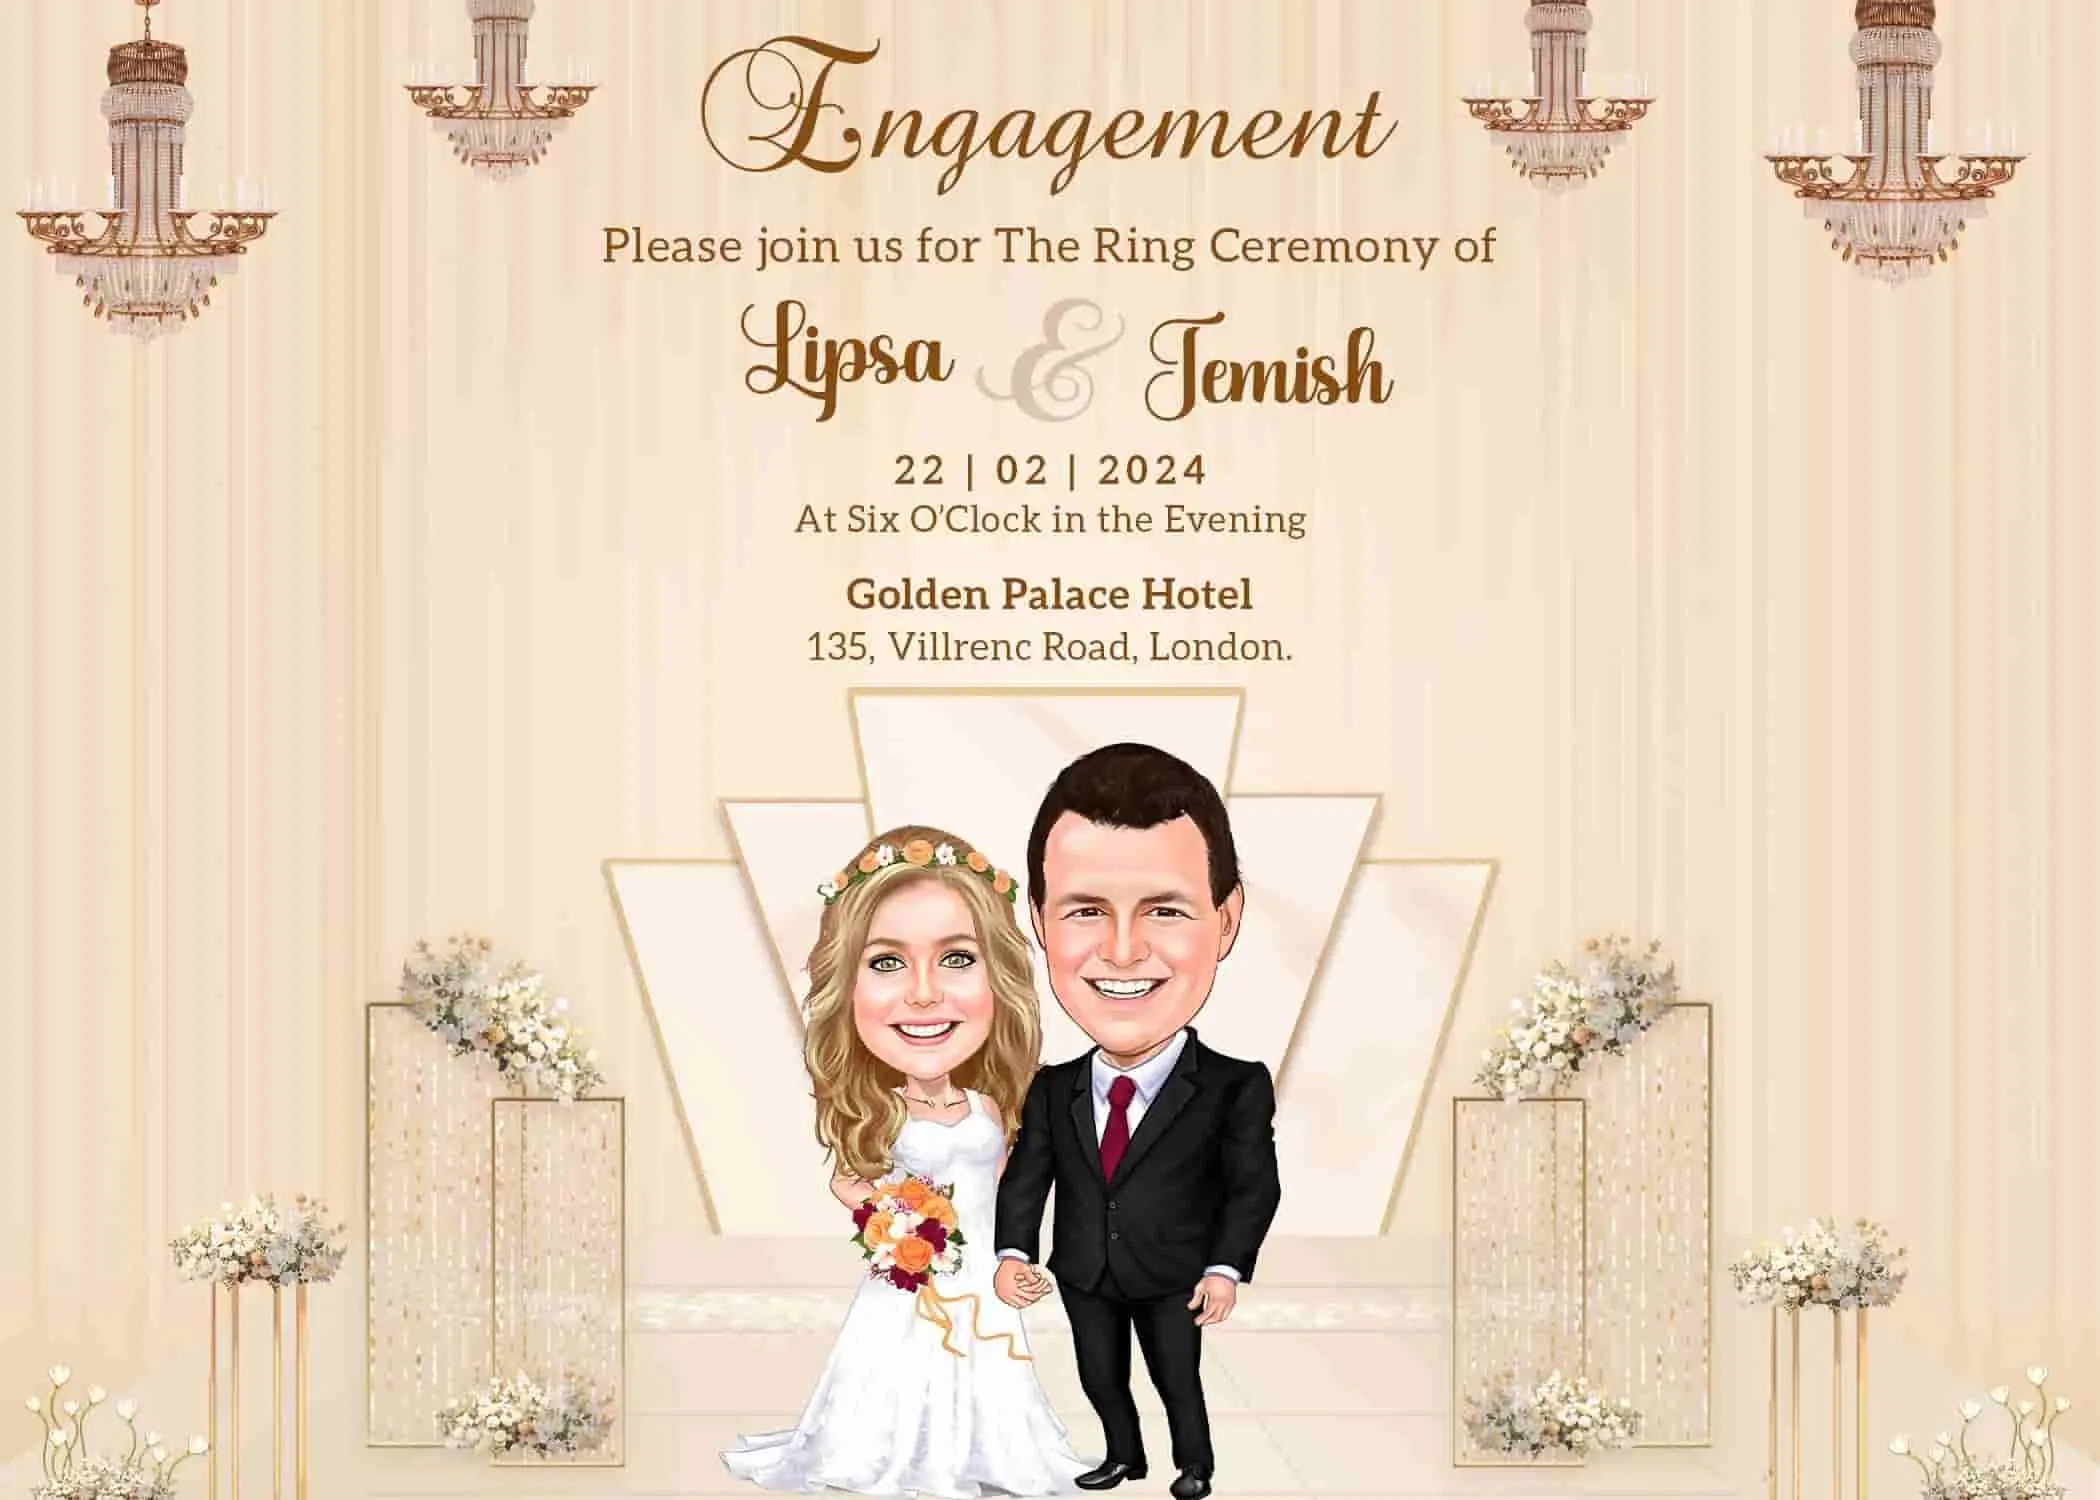 10+ Engagement Ceremony Invitations - Word, PSD, AI